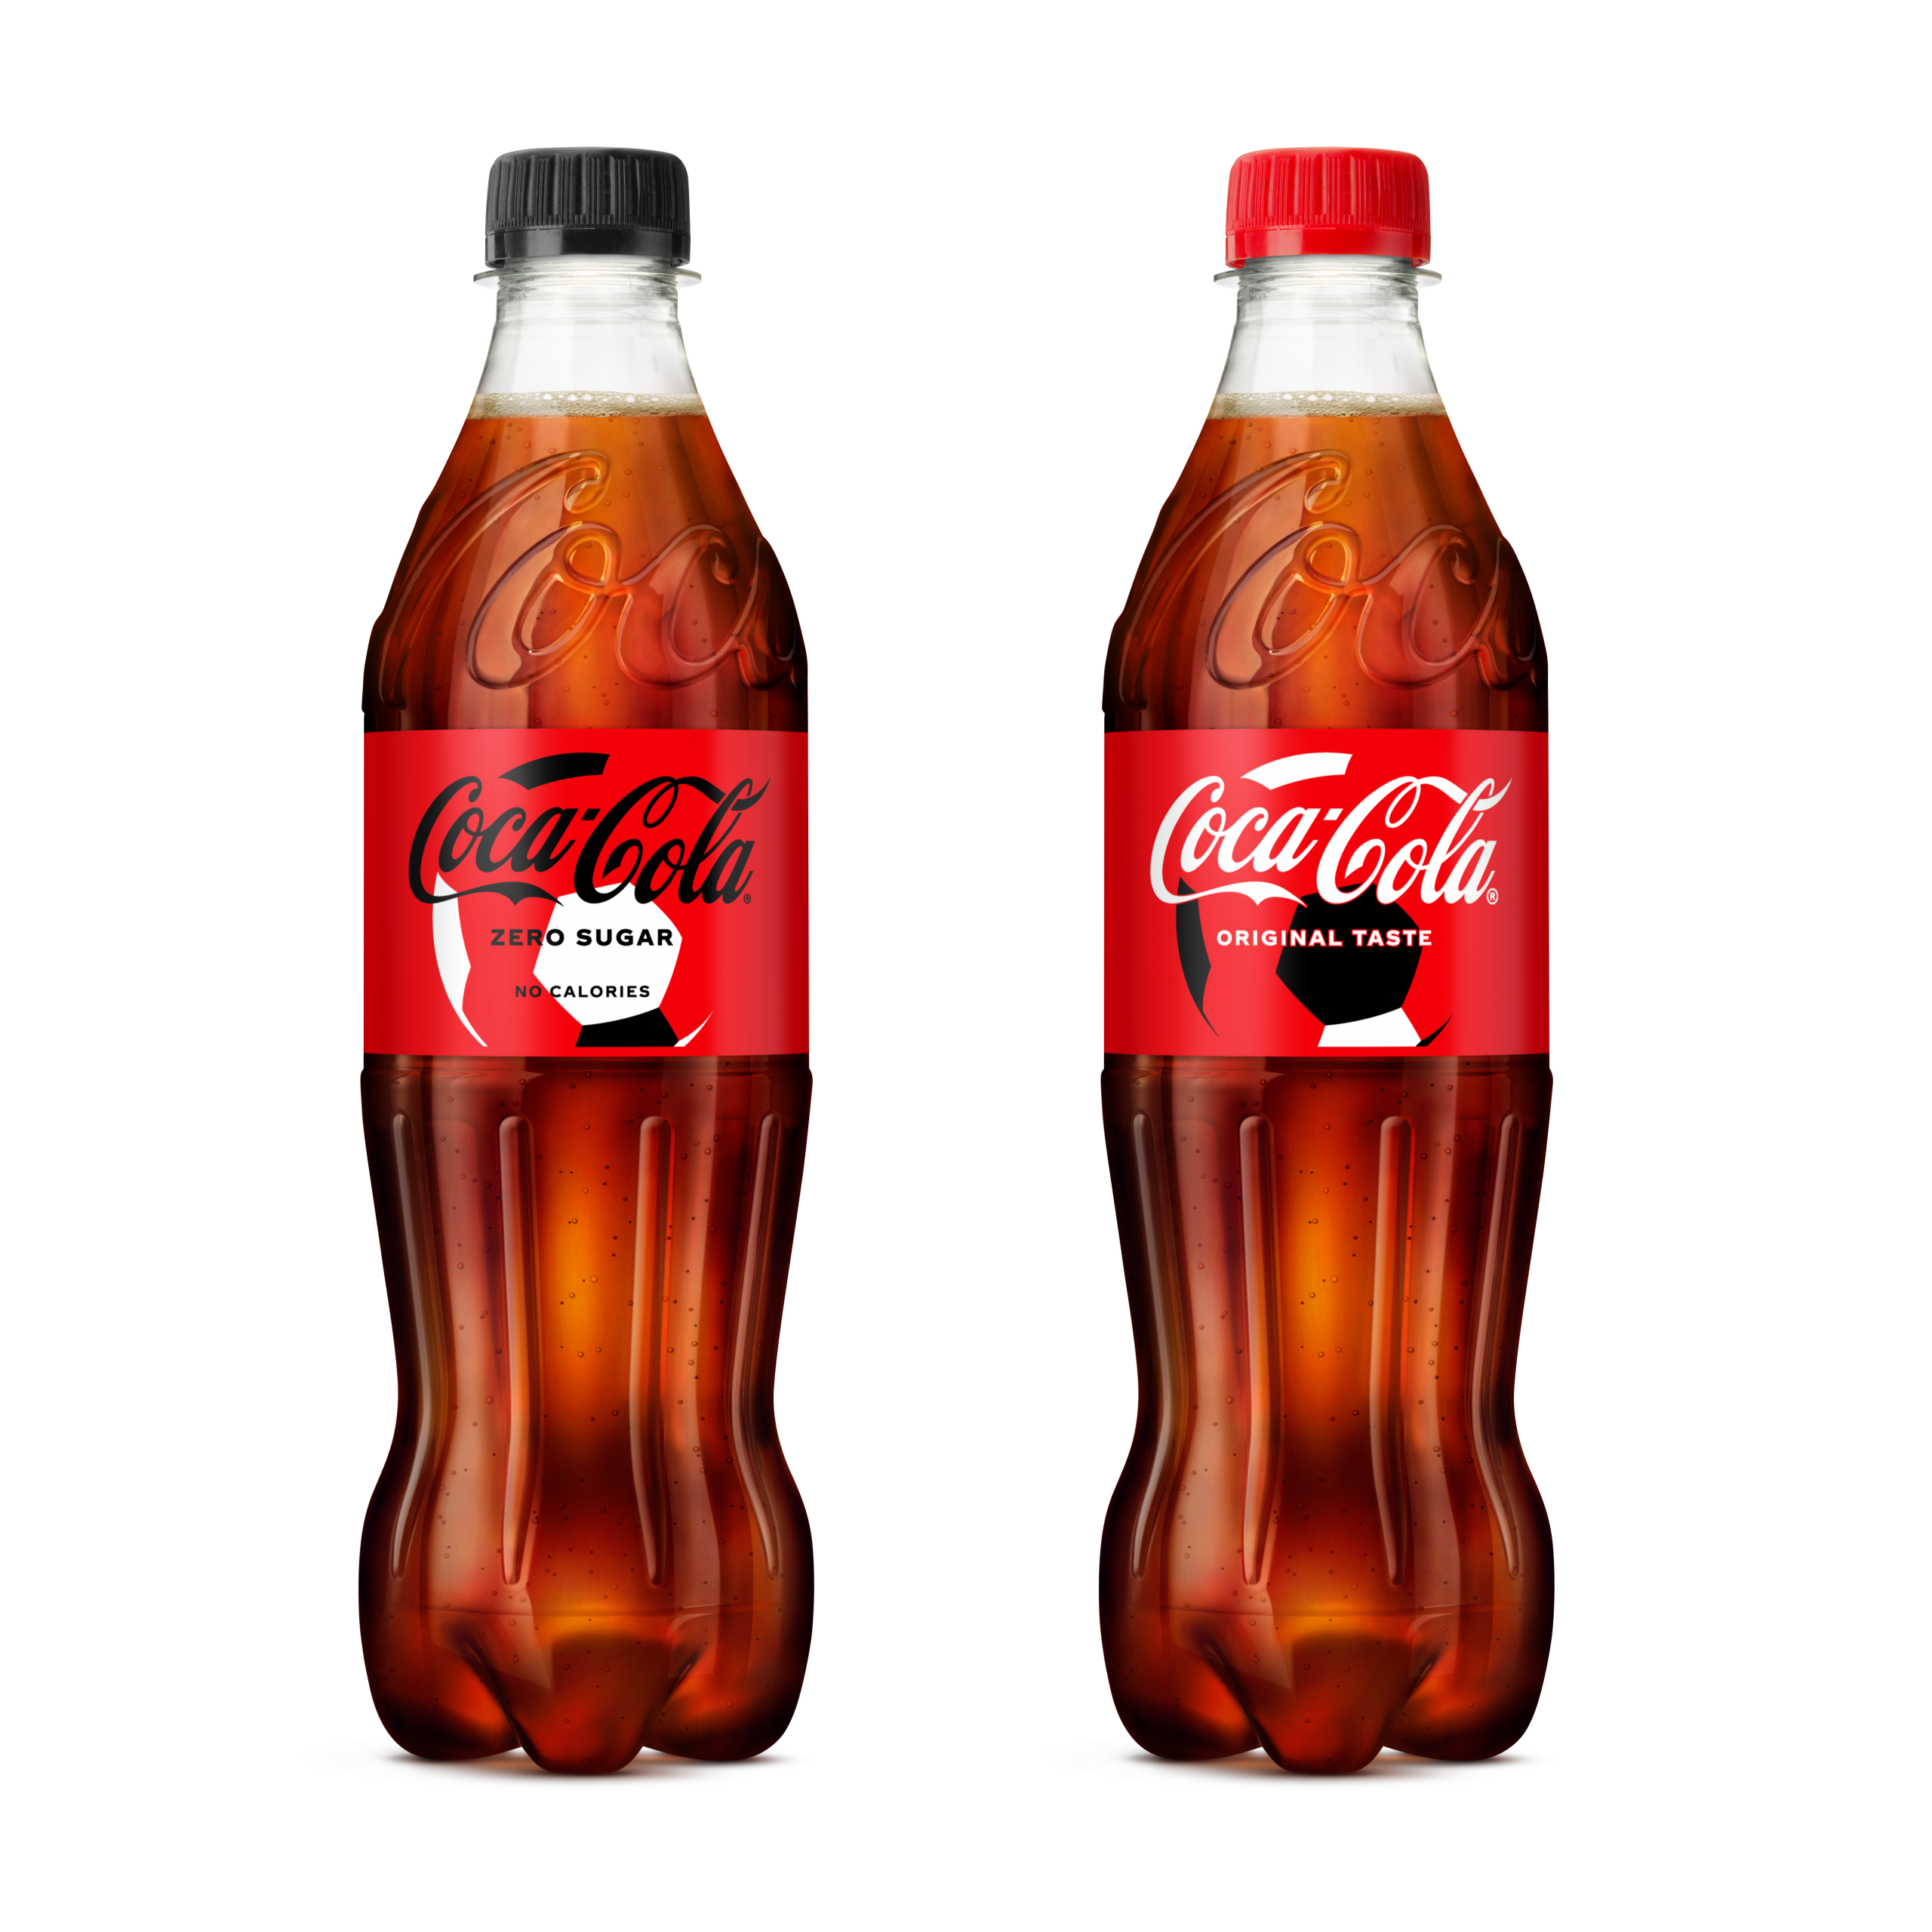 Coca-Cola launches FIFA World Cup campaign, on-pack promotion